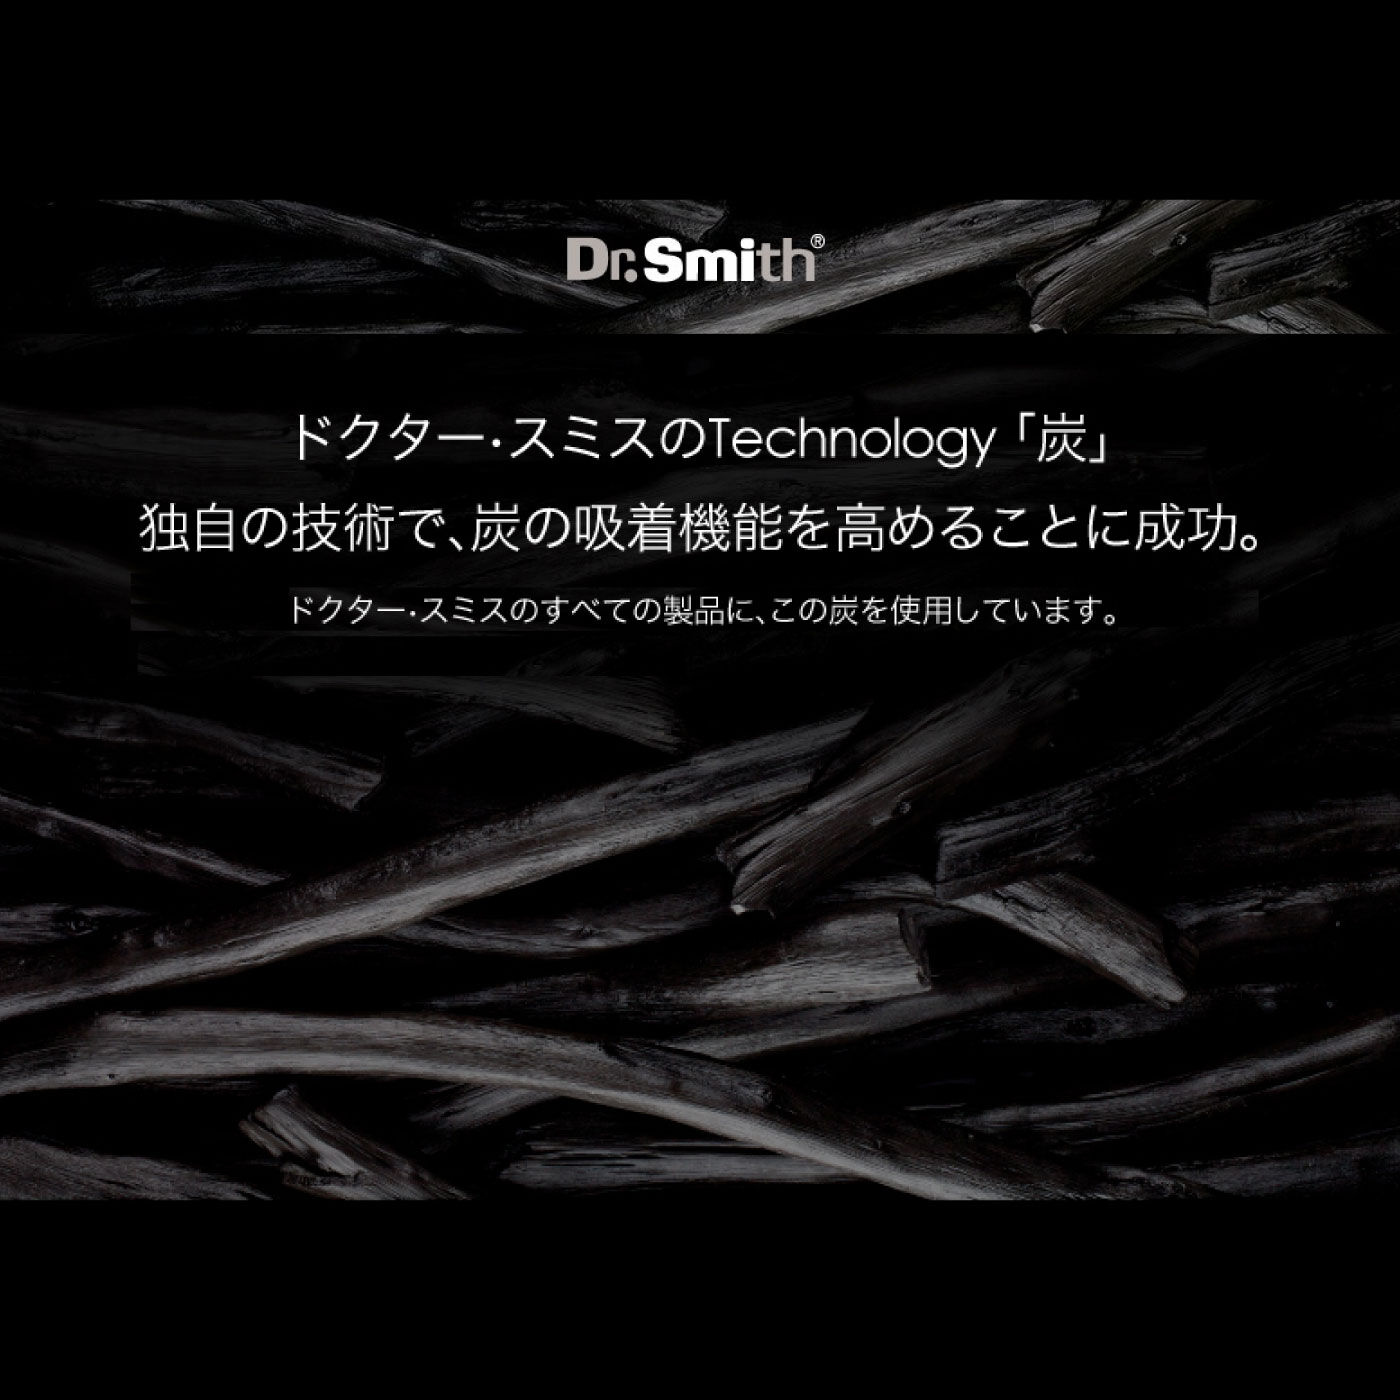 FELISSIMO PARTNERS|さわやかな朝のめざめ　Dr．Smith　炭わた入り枕